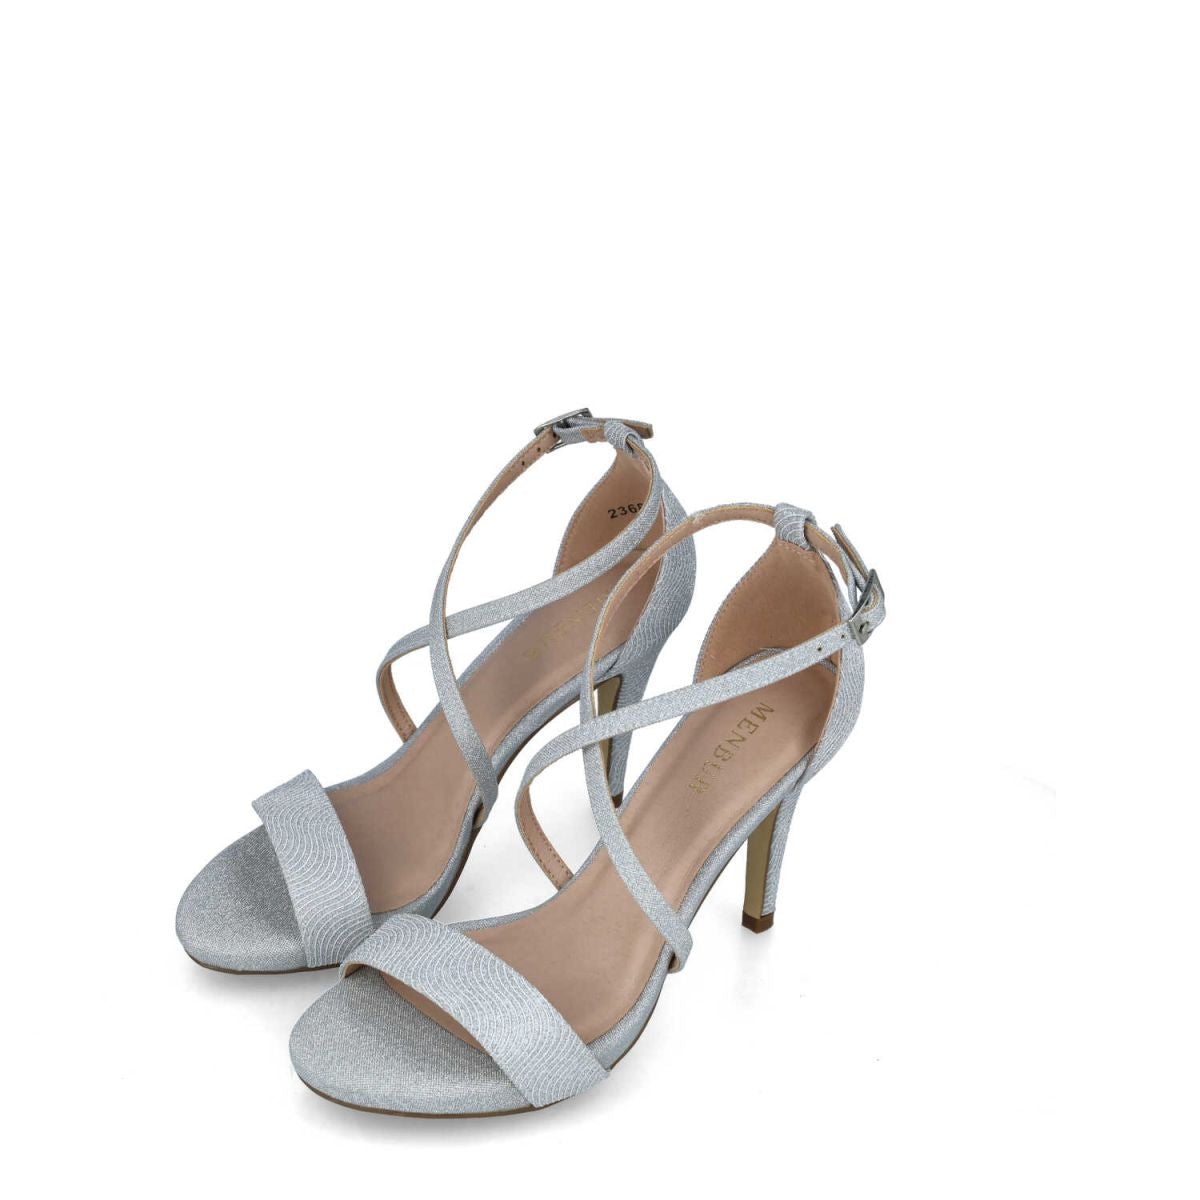 Front view of the Silver Strappy Evening Sandals.